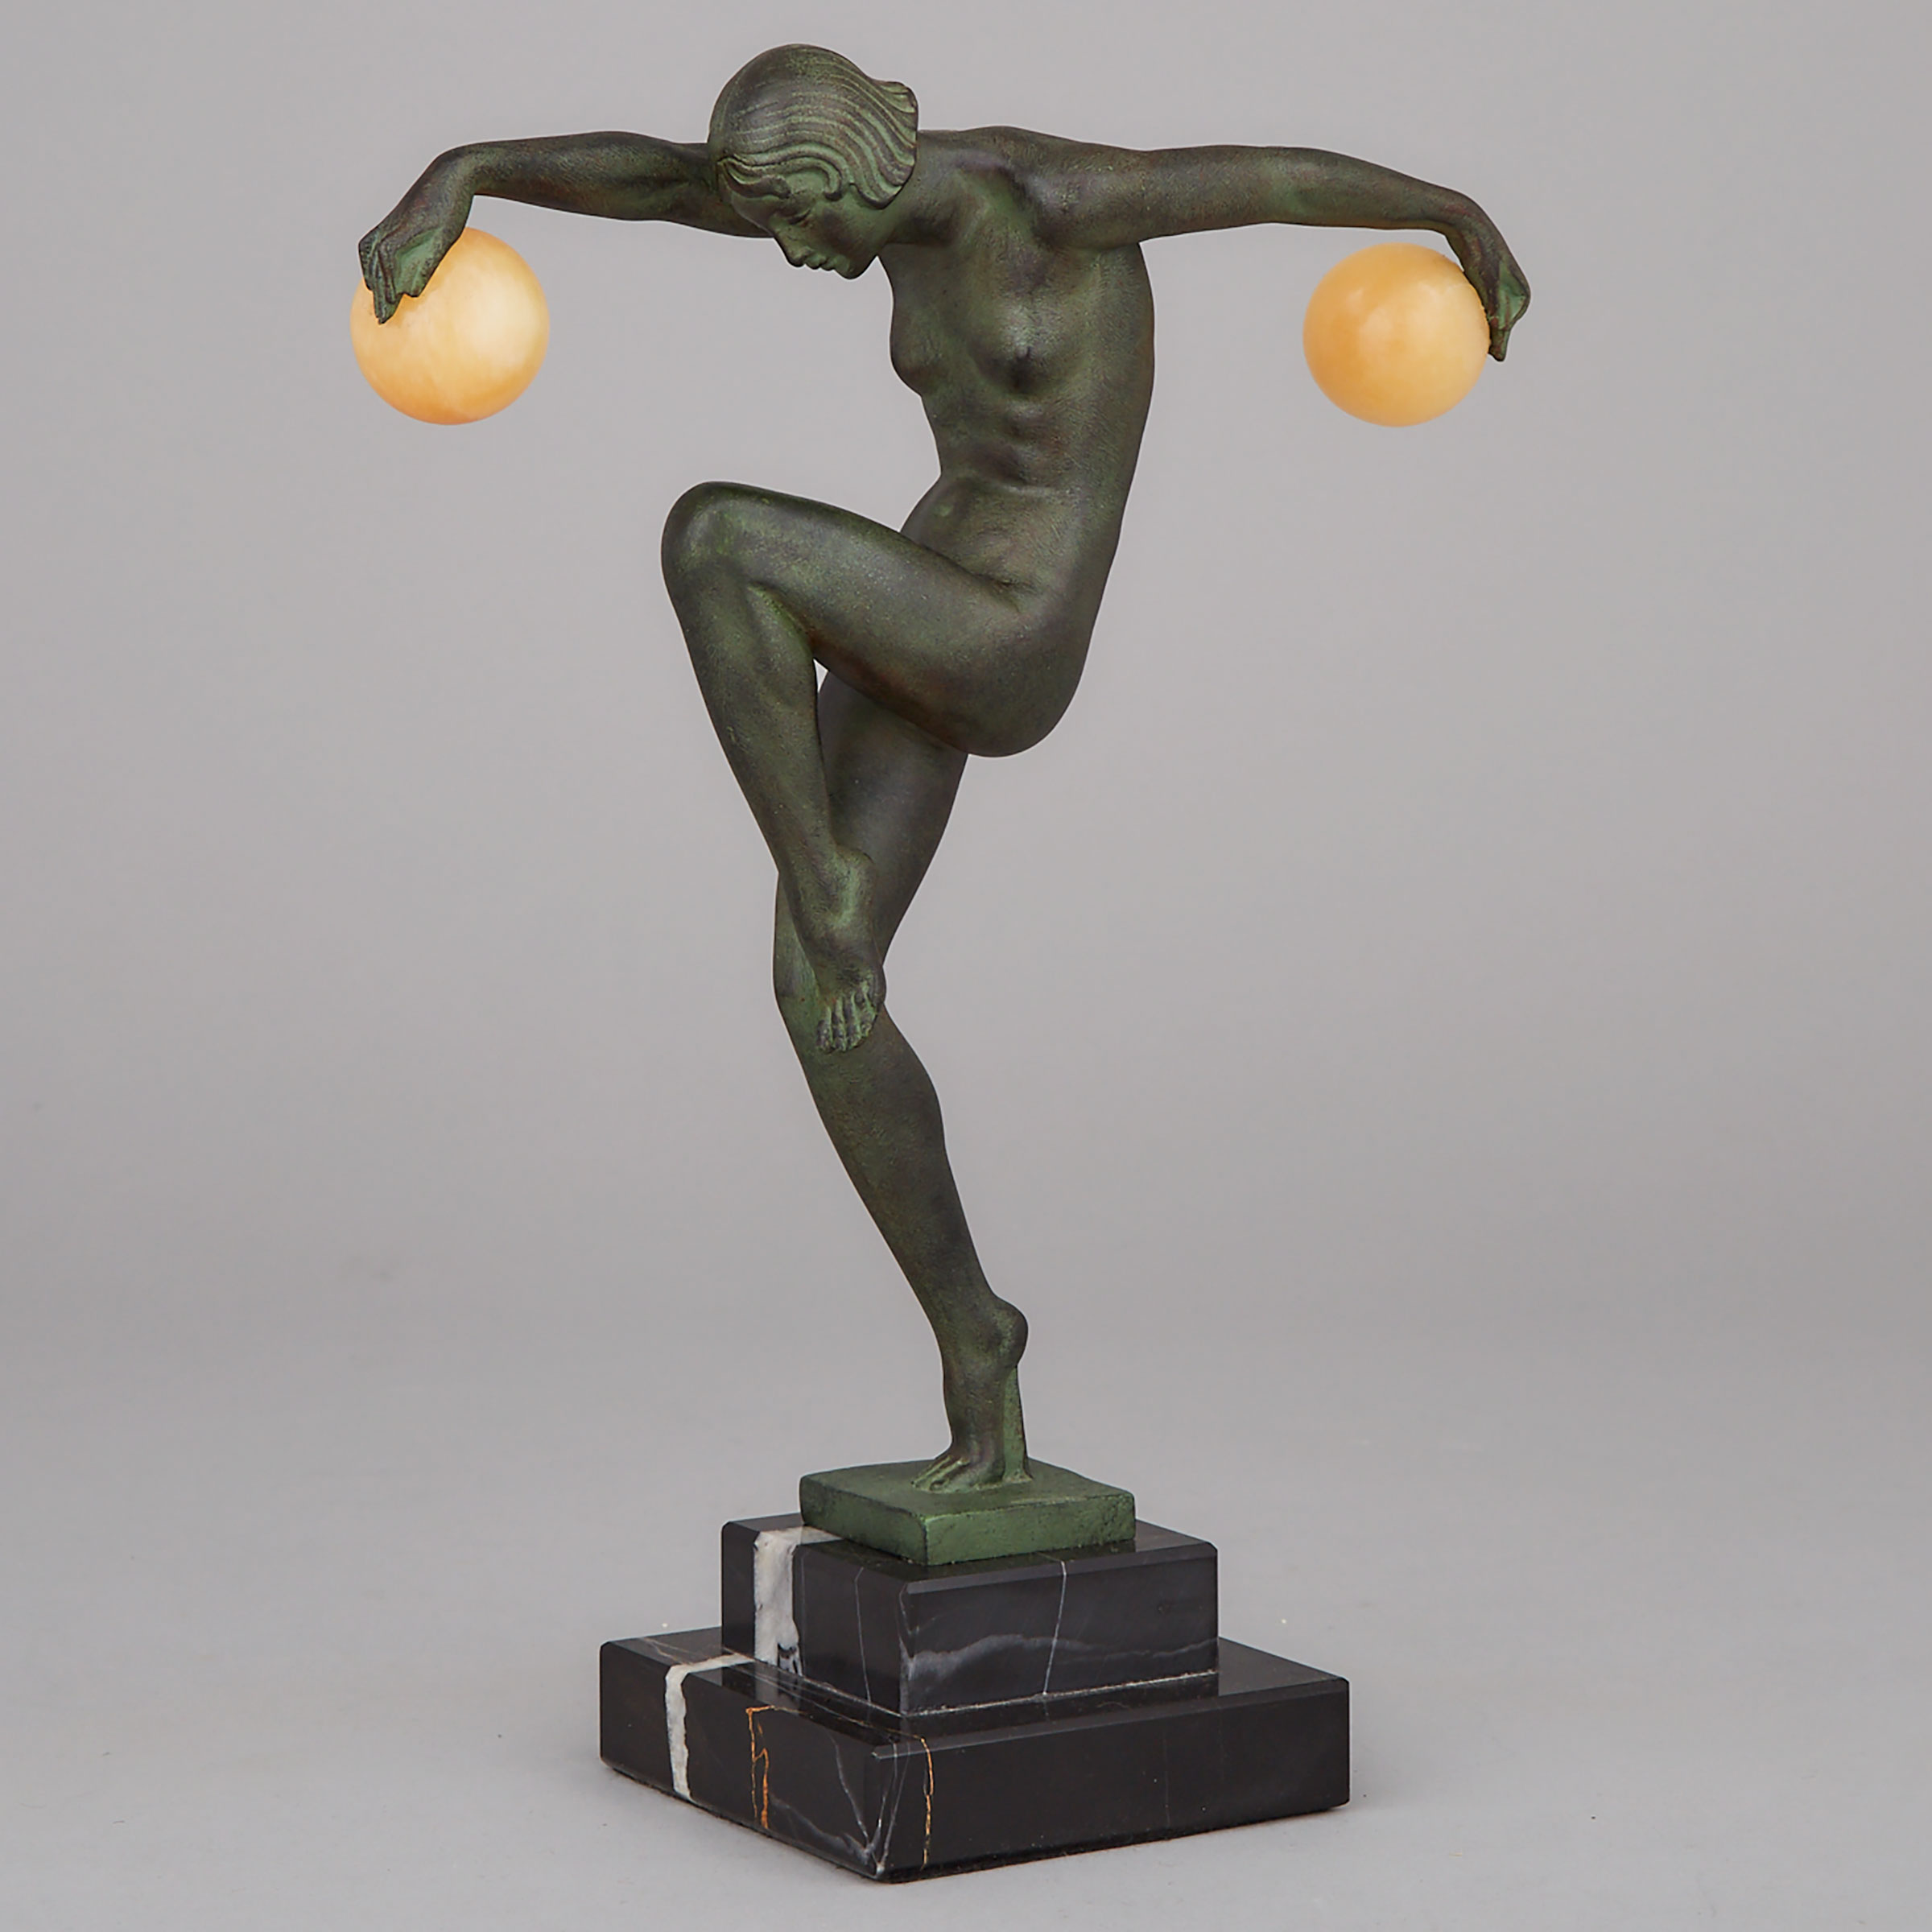 French Art Deco Bronze Patinated Metal Figure of a Ball Dancer, 20th century